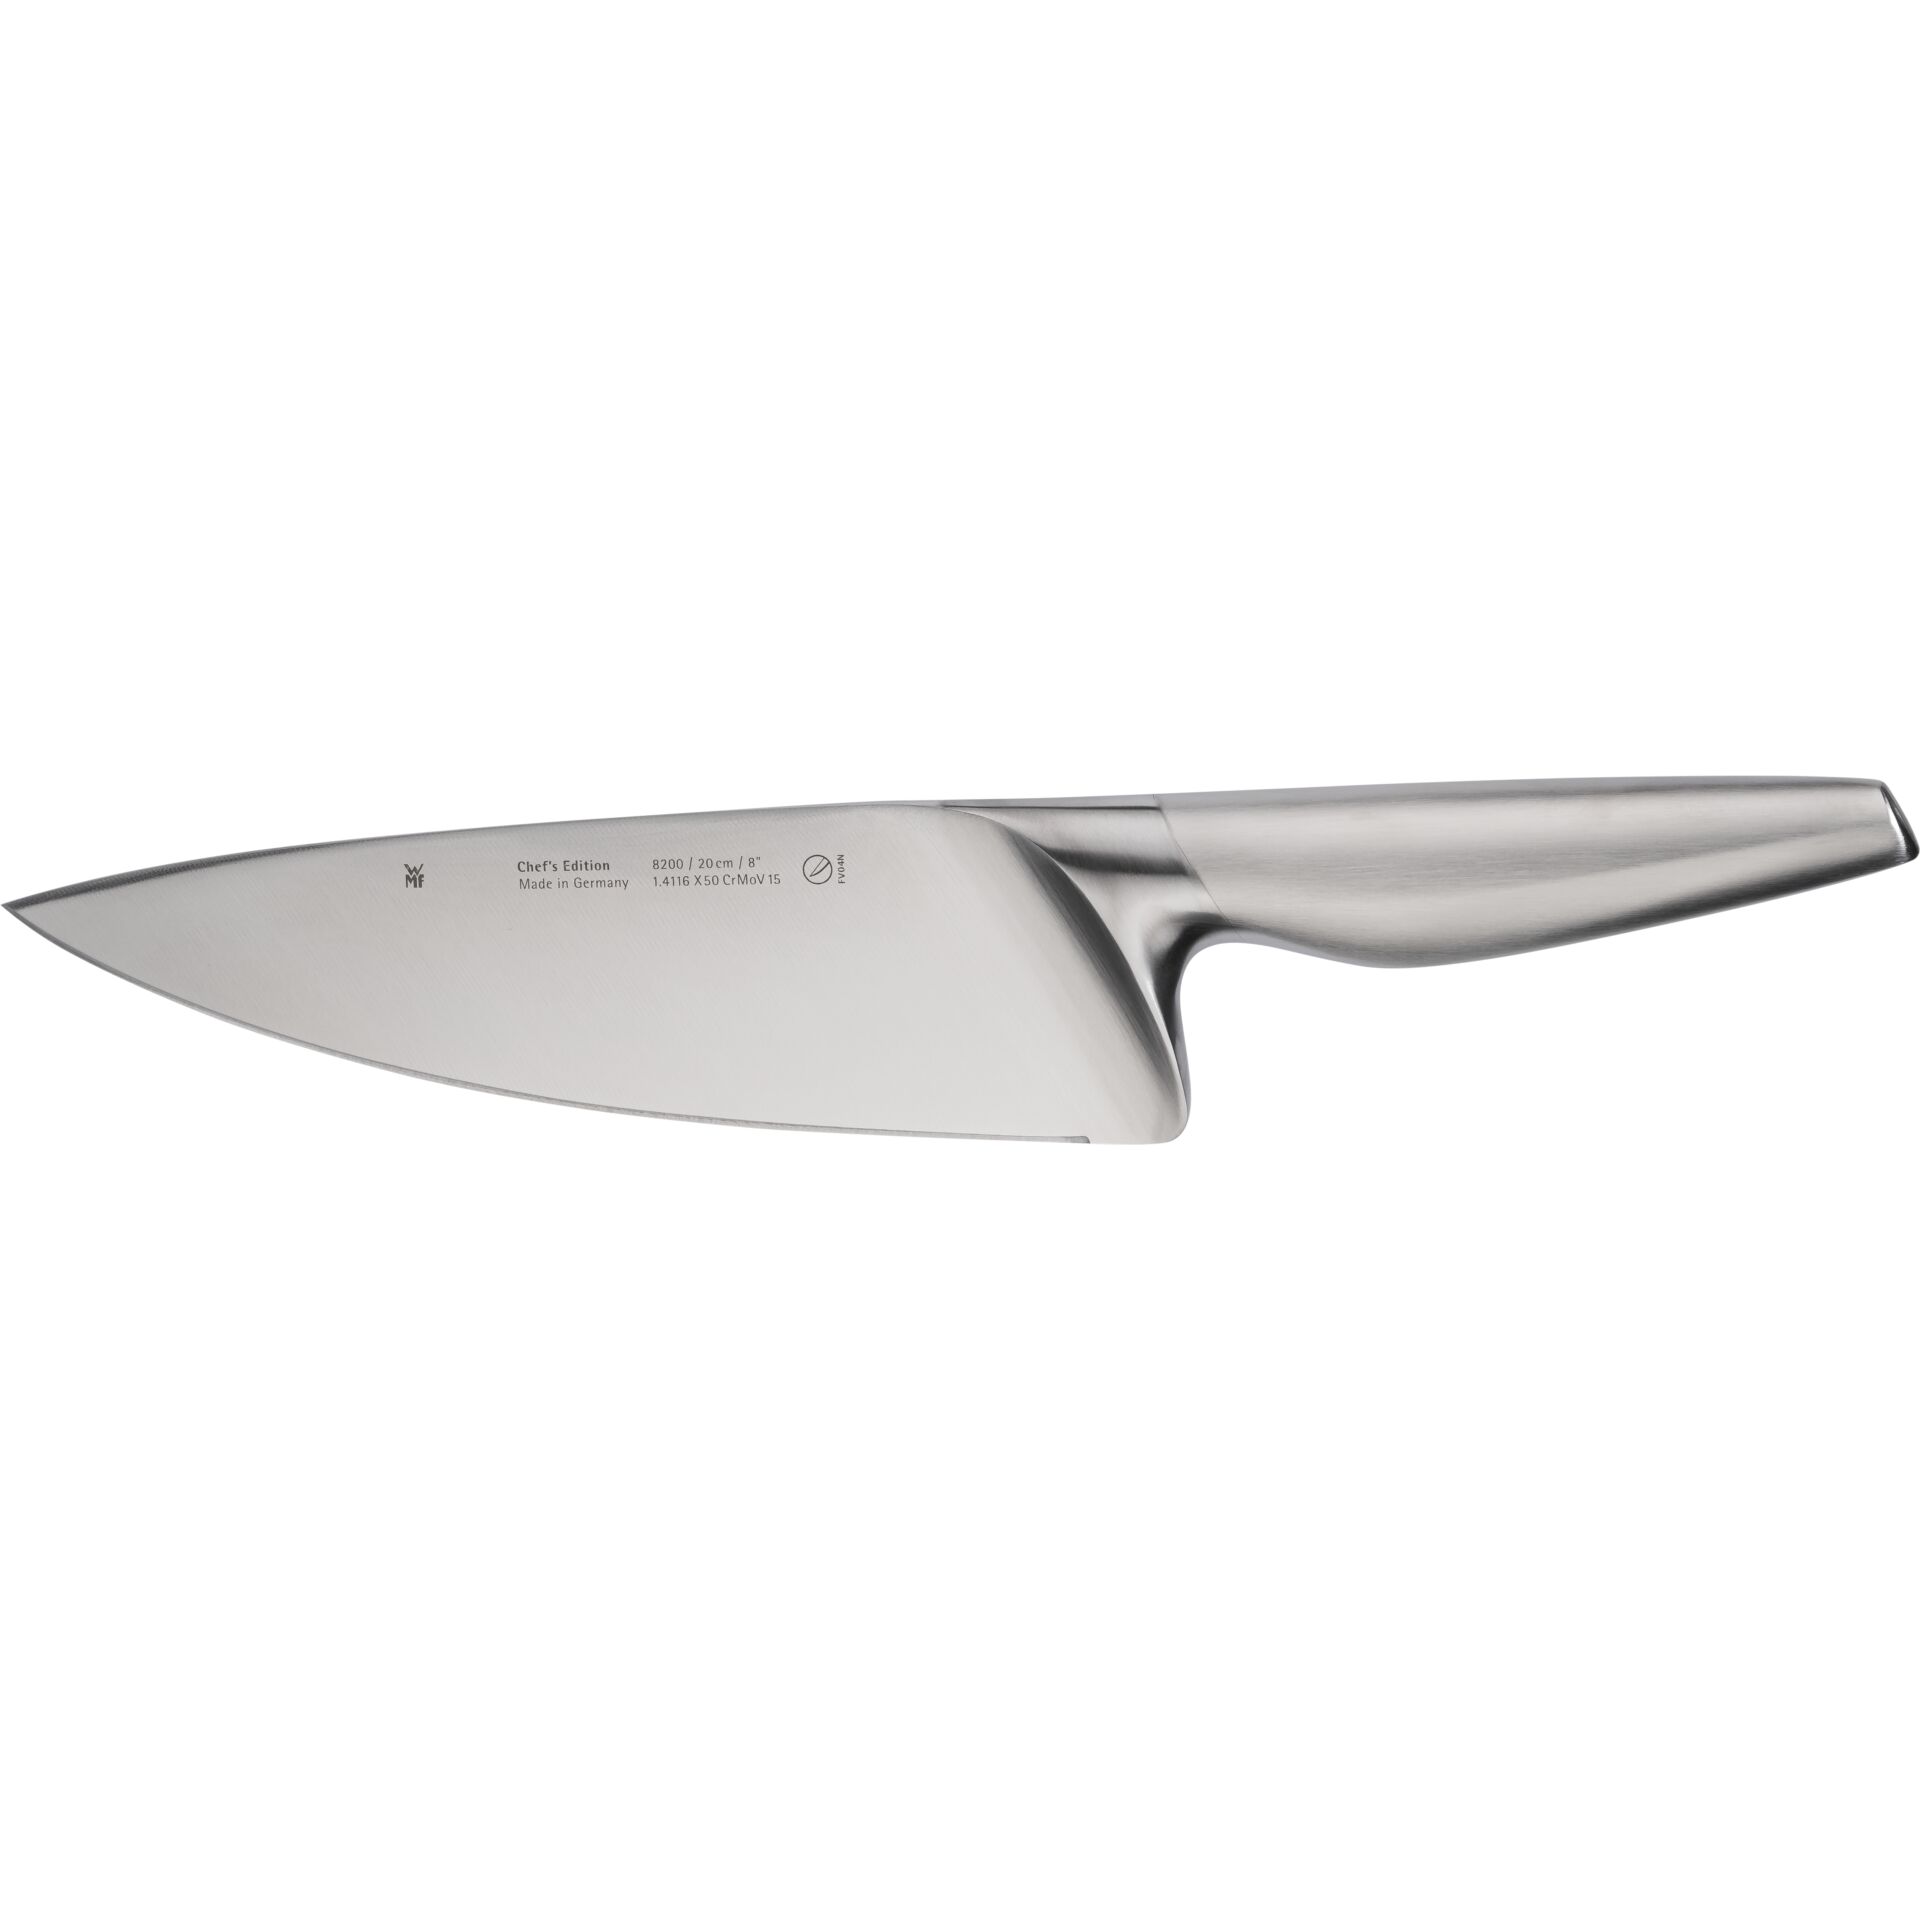 WMF cooking knife 20 cm